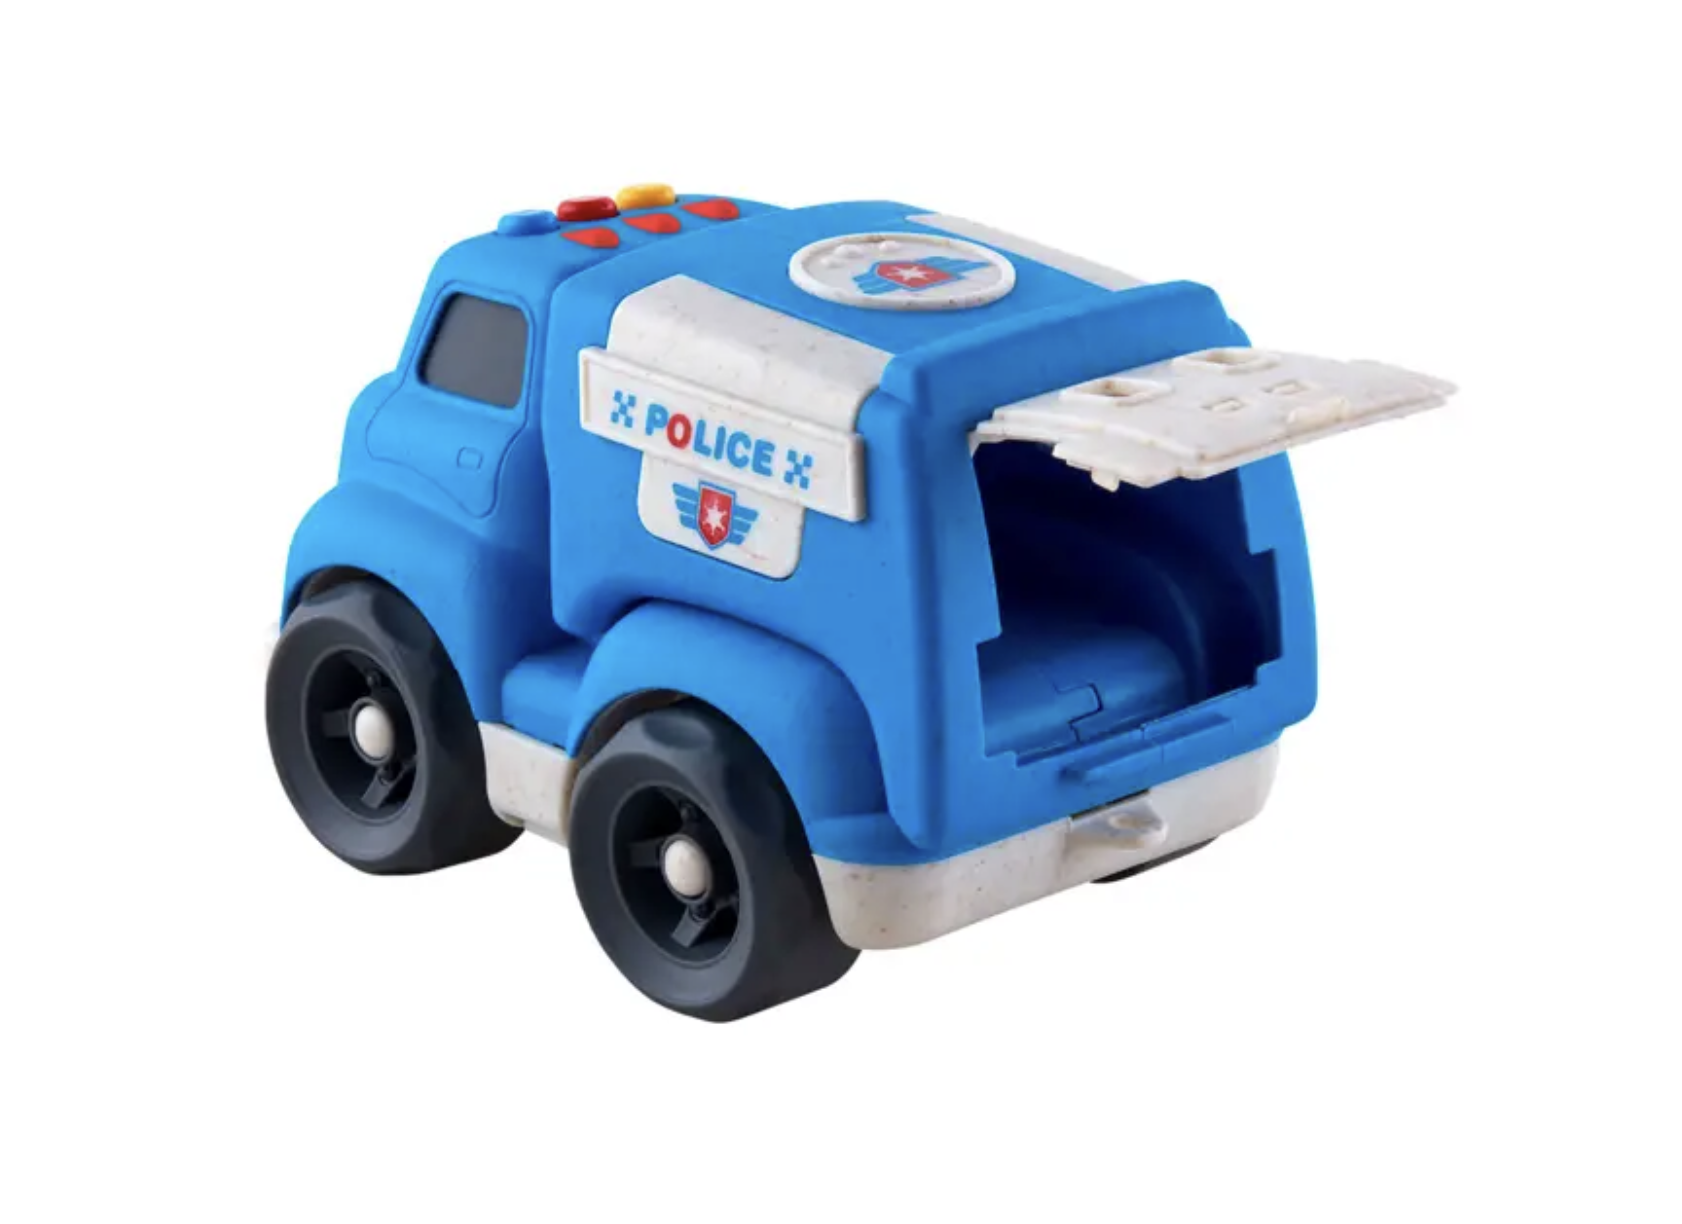 Police Vehicle Truck Toy